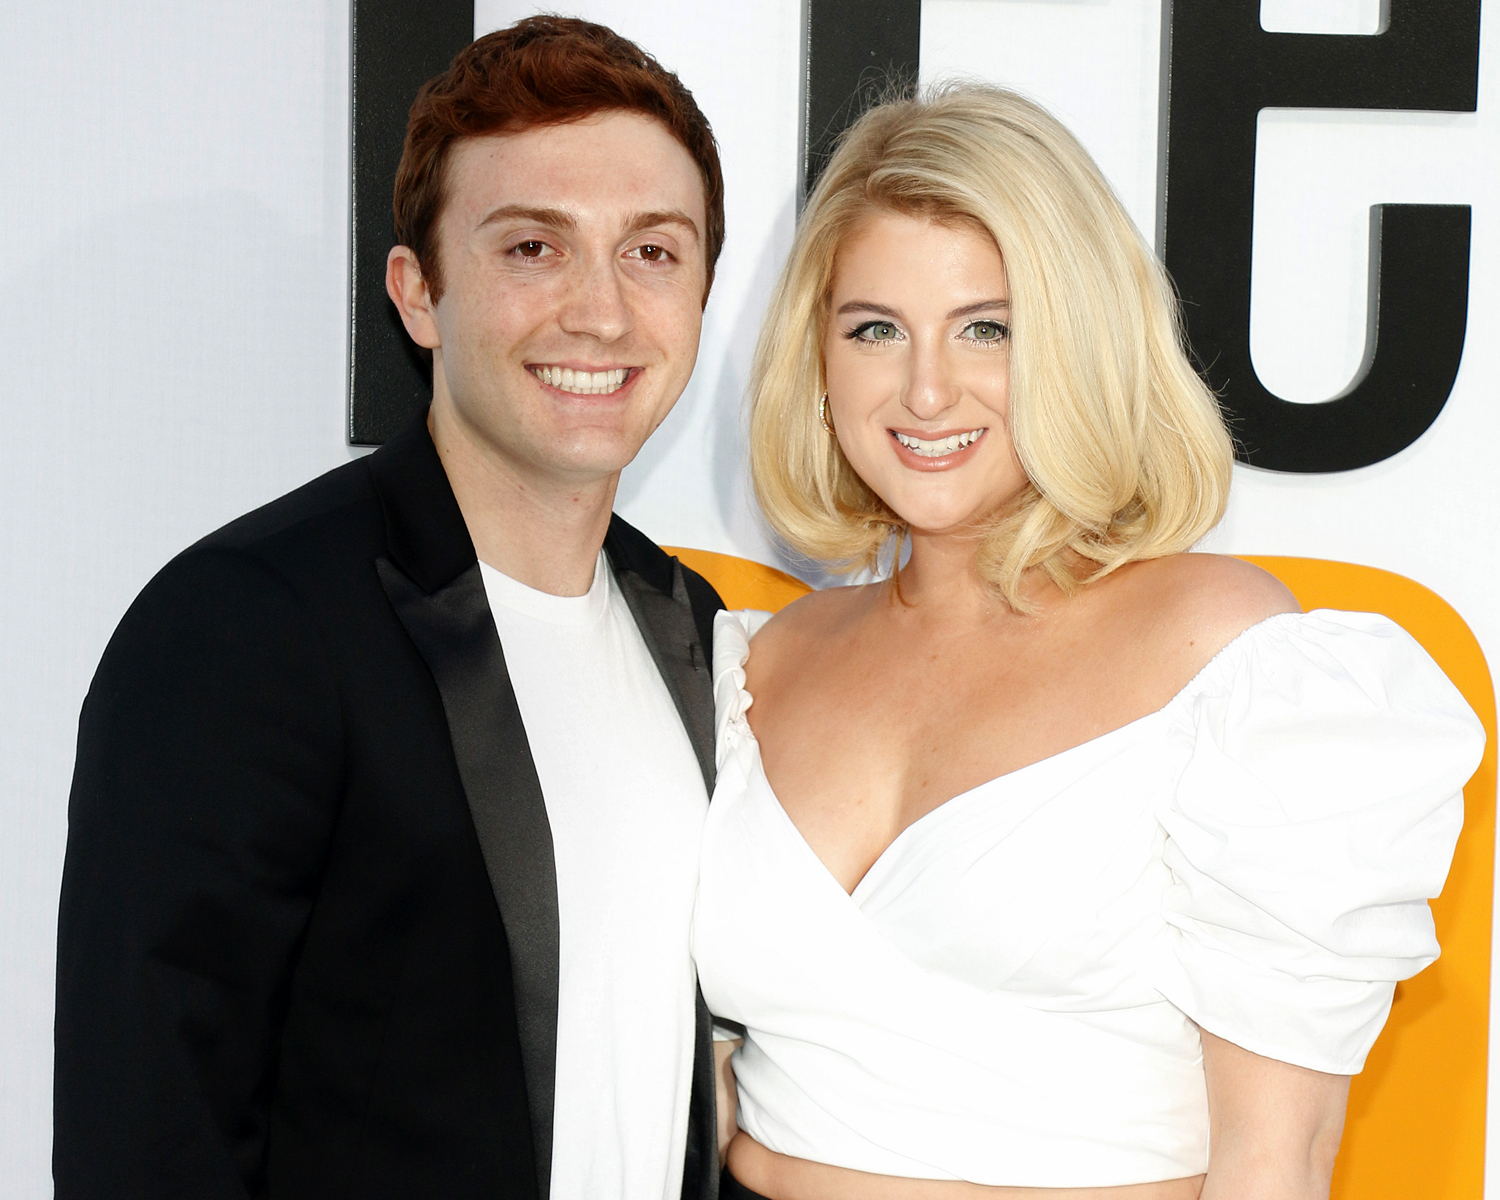 Meghan Trainor & Husband Daryl Sabara Are Expecting Their Second Baby